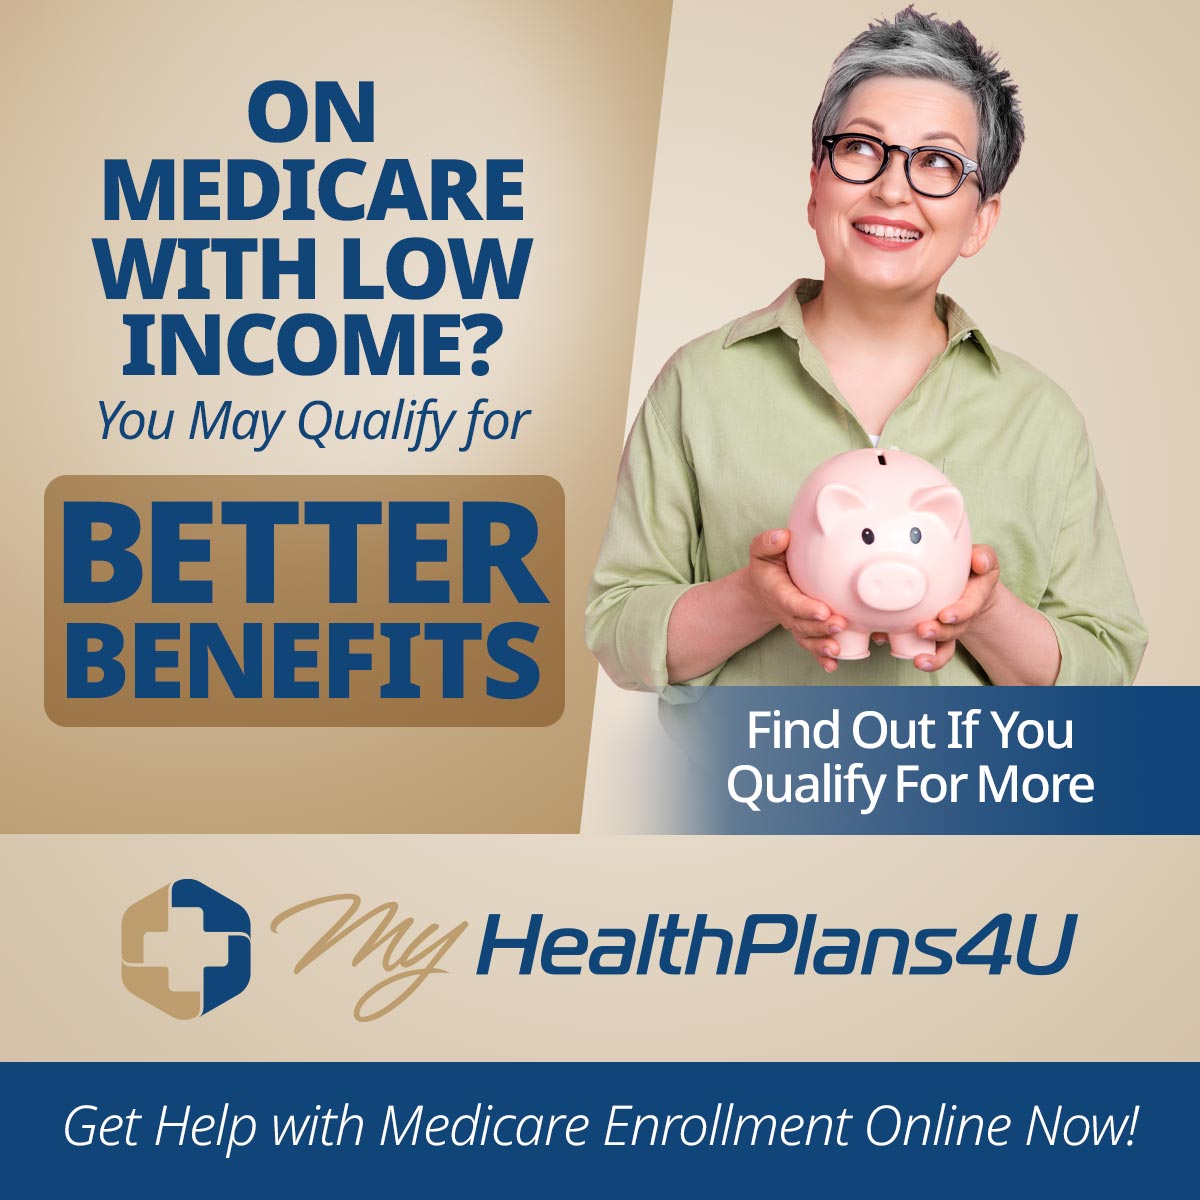 On Medicare with Low Income? Find out if you qualify for more. My Health Plans 4 U. Get help with Medicare online now!